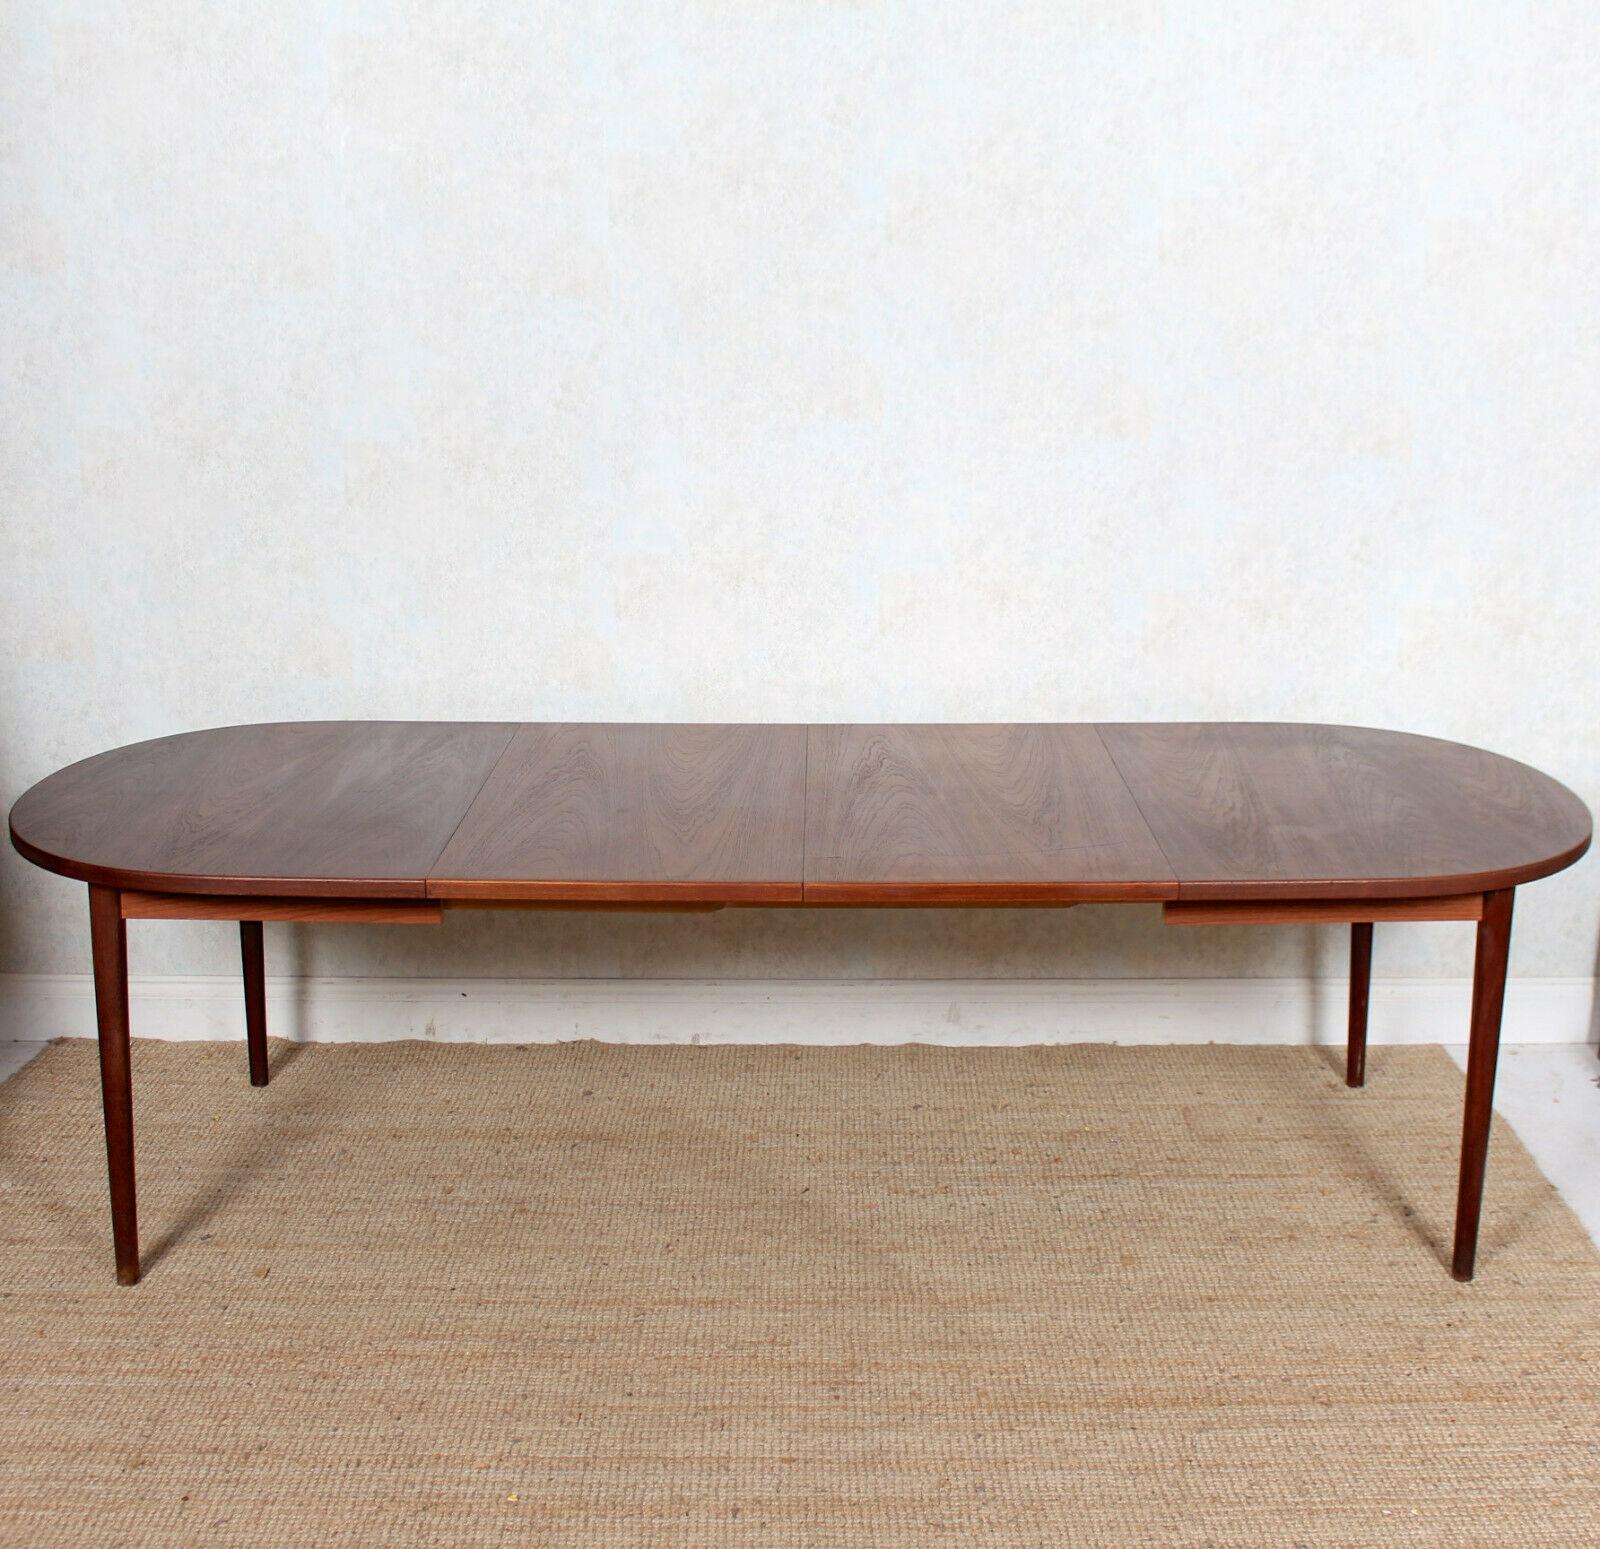 An impressive mid-20th century Swedish dining table designed by Nils Jonsson and manufactured by Hugo Troeds.
The shaped top raised on bolted shaped tapering legs and extending by way of two spare leafs. Fully extended the piece seats 10-12